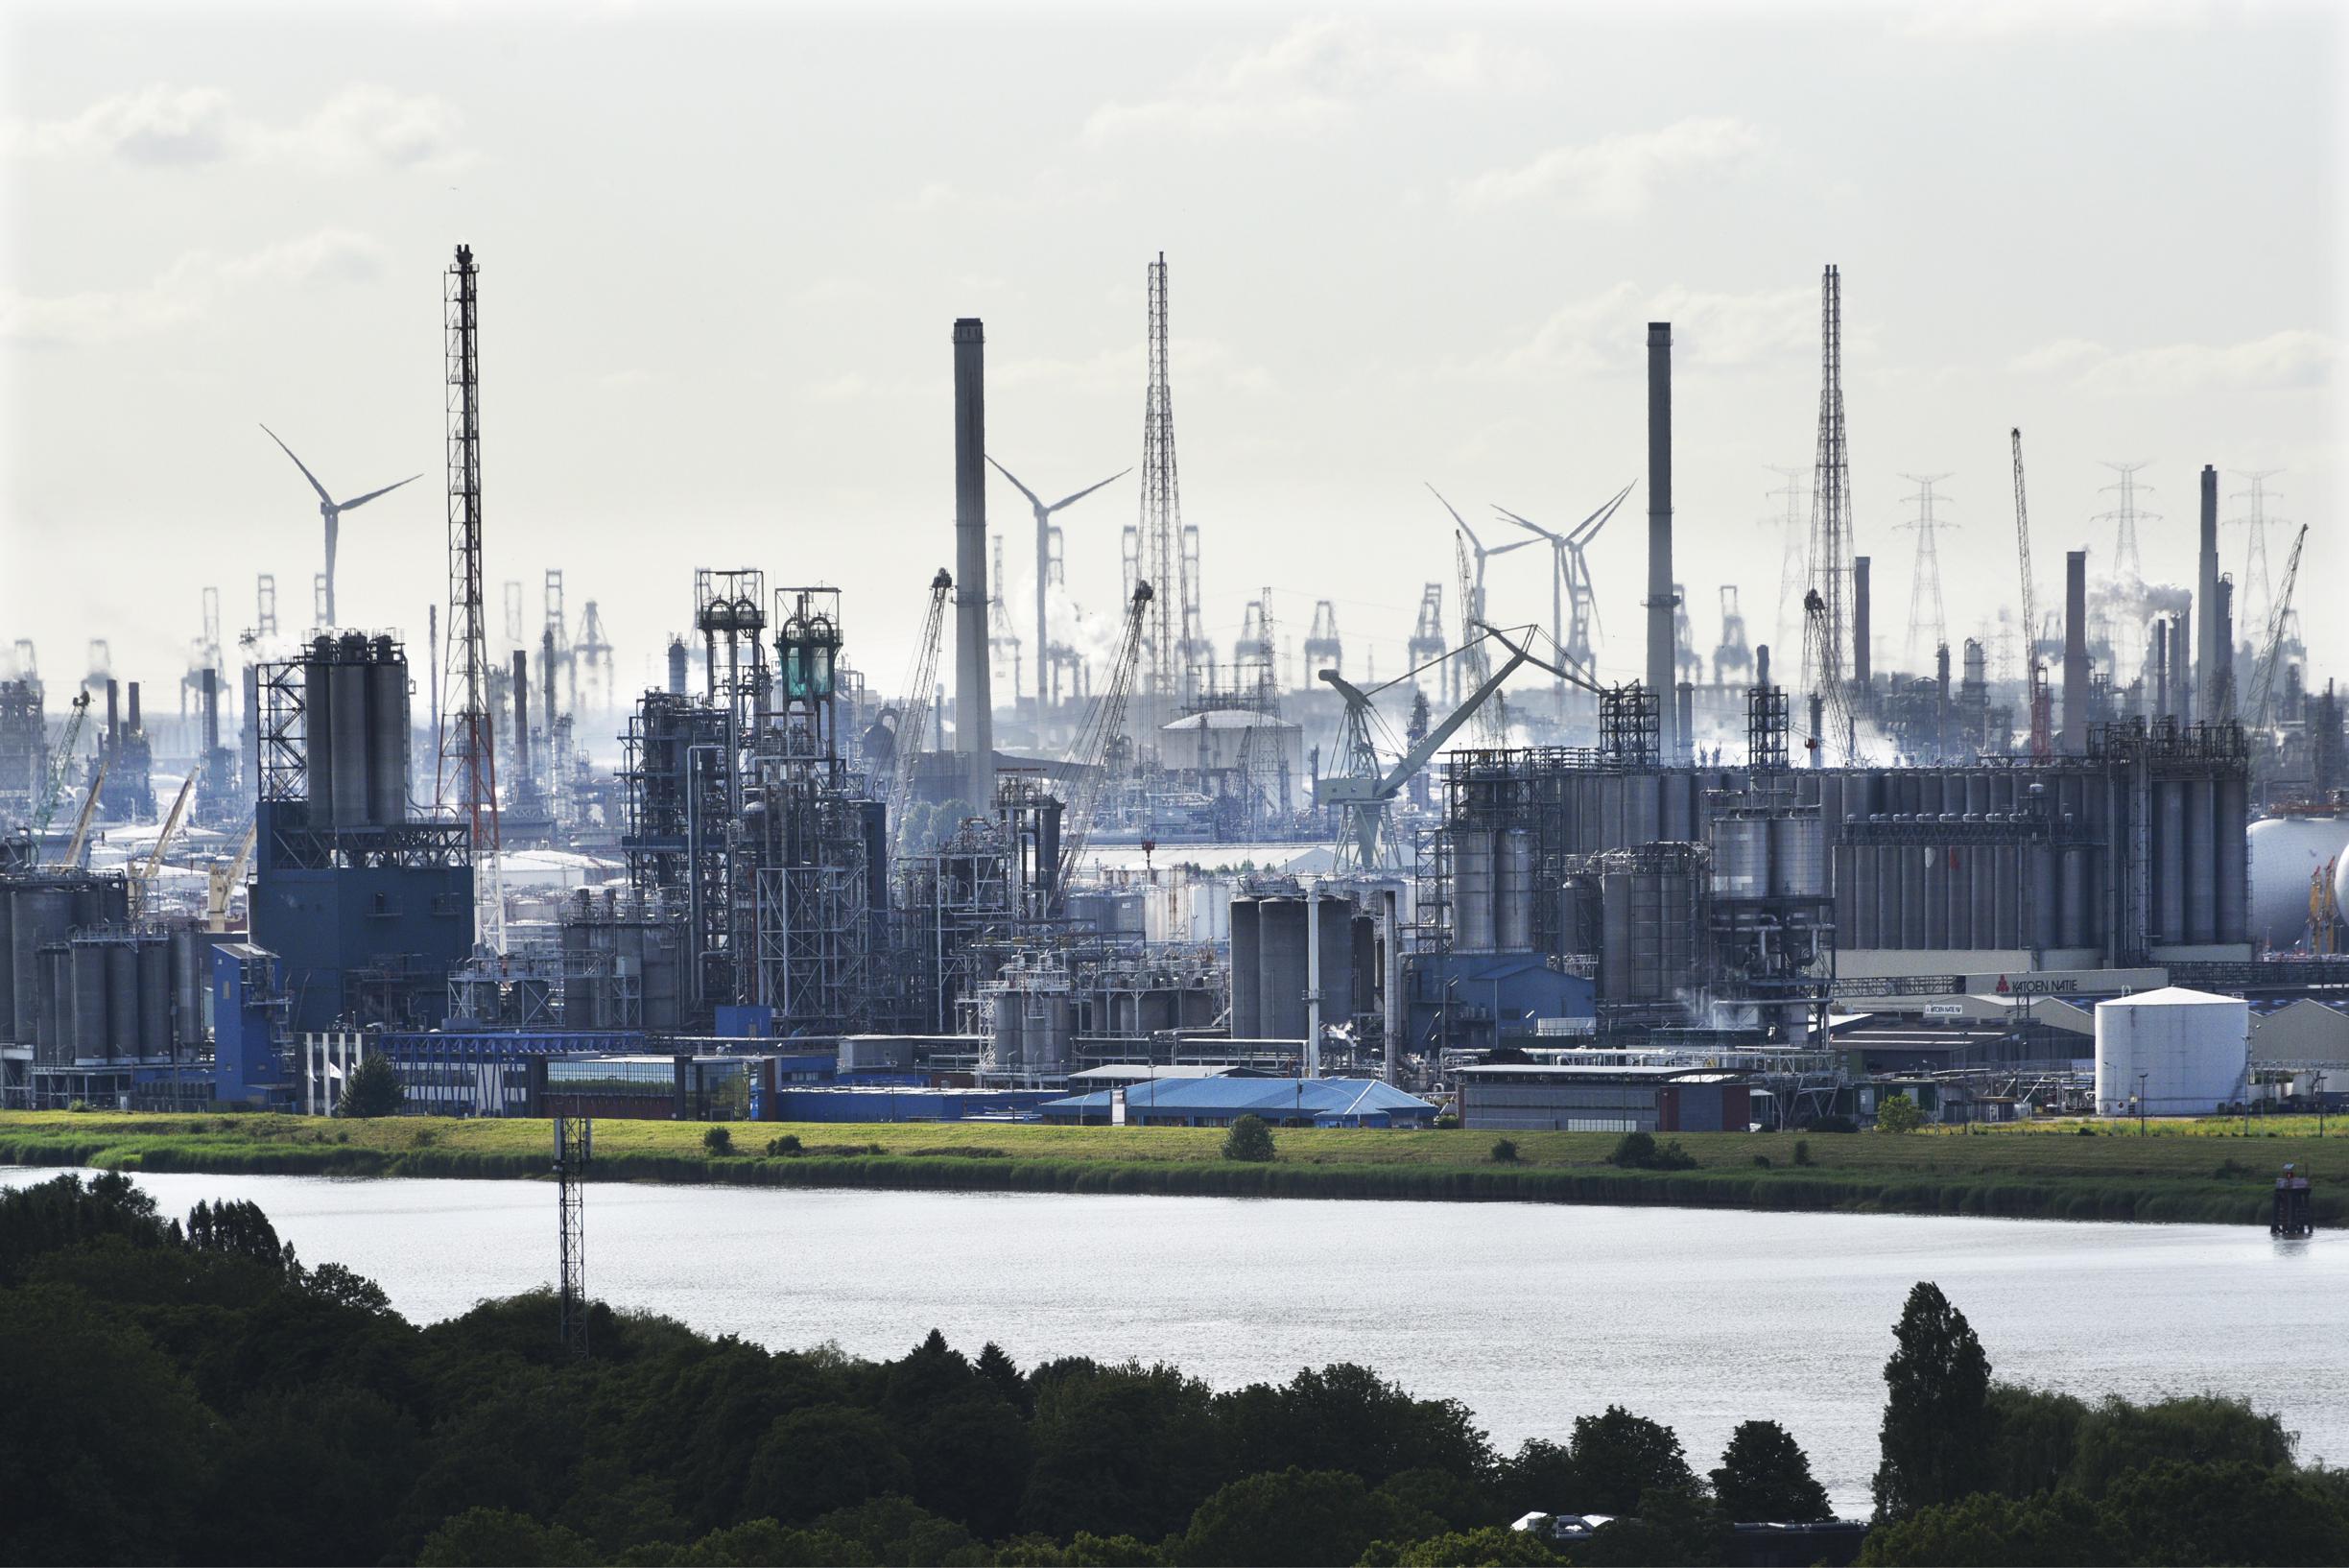 Carbon Tracker says Paris 2015 environmental targets far outpace industry